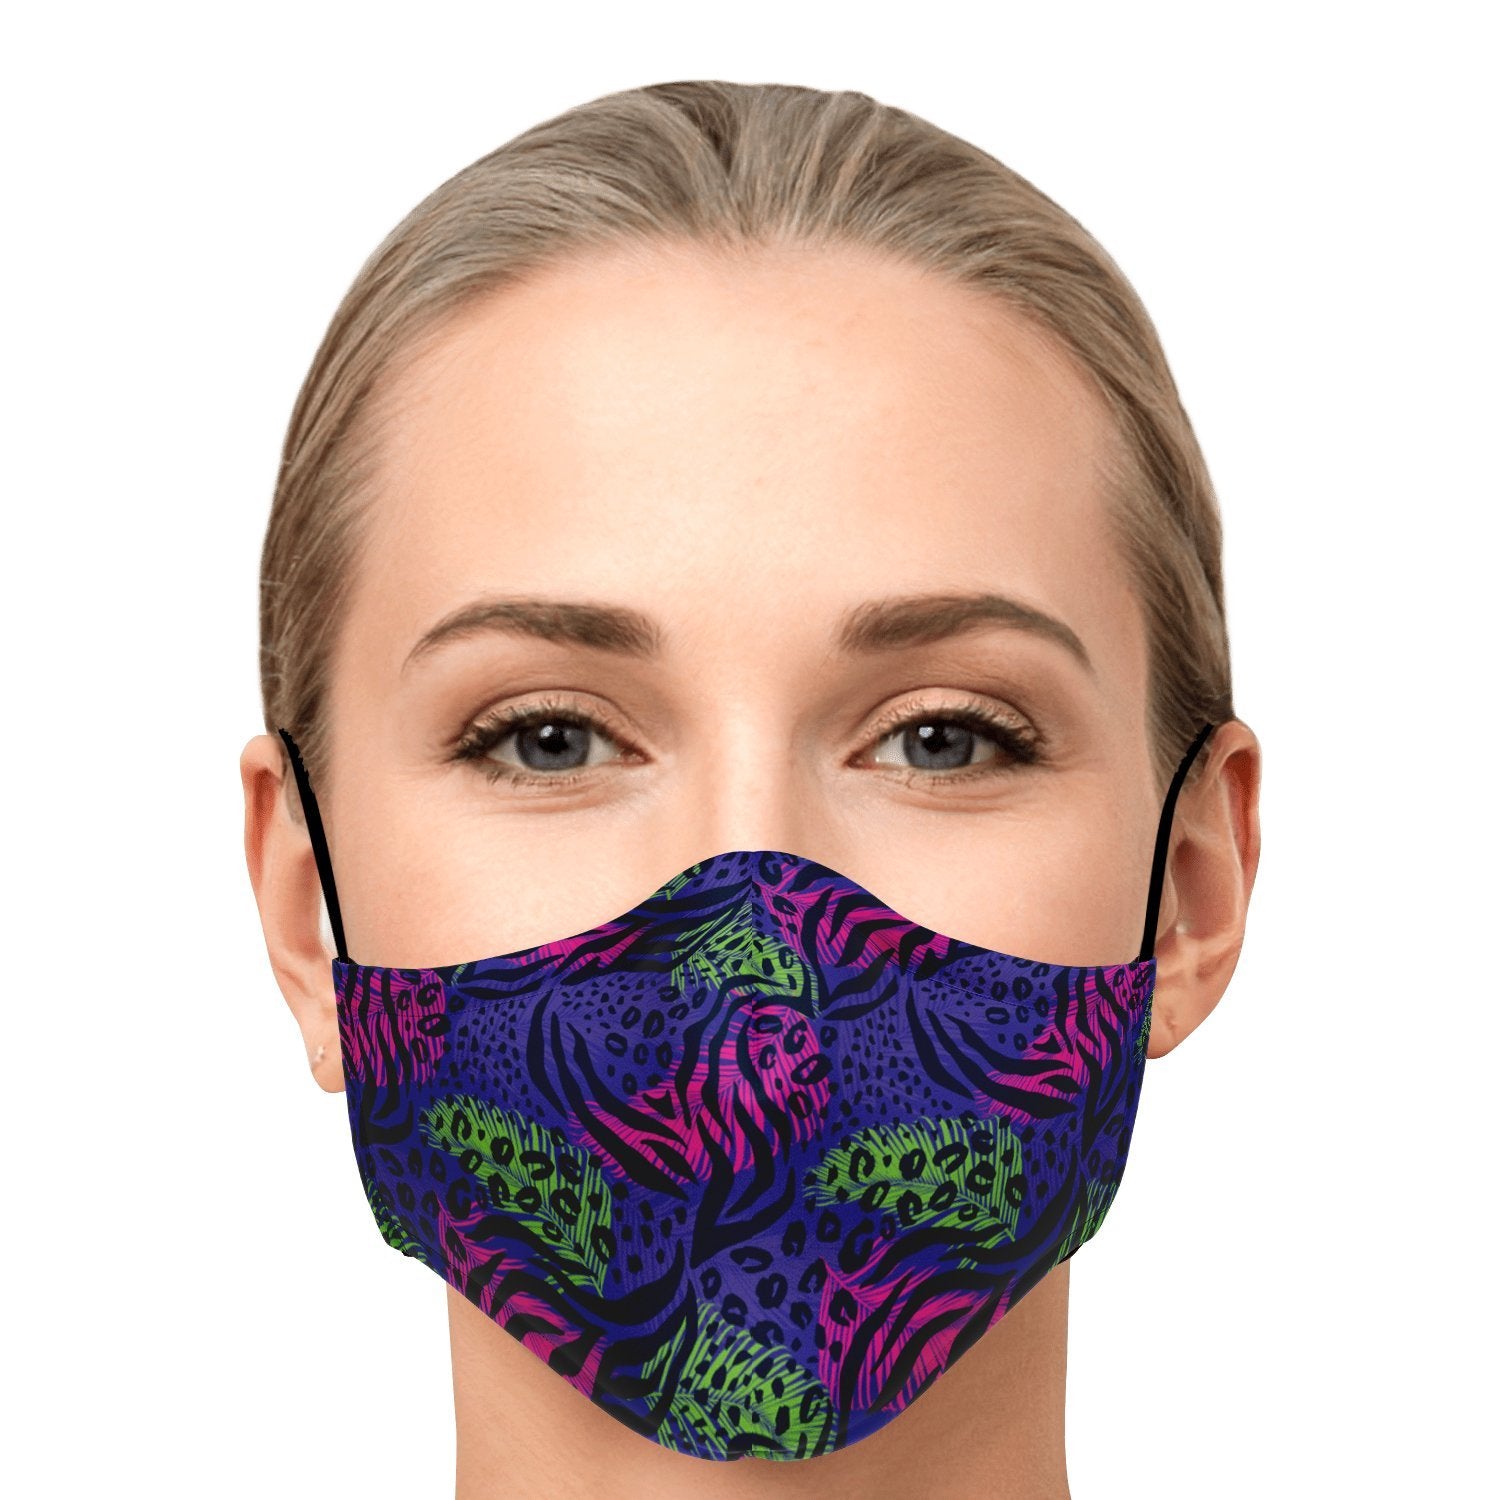 Floral Leaves Animal Pattern Adult Youth Kids Adjustable Face Mask With Filter - kayzers